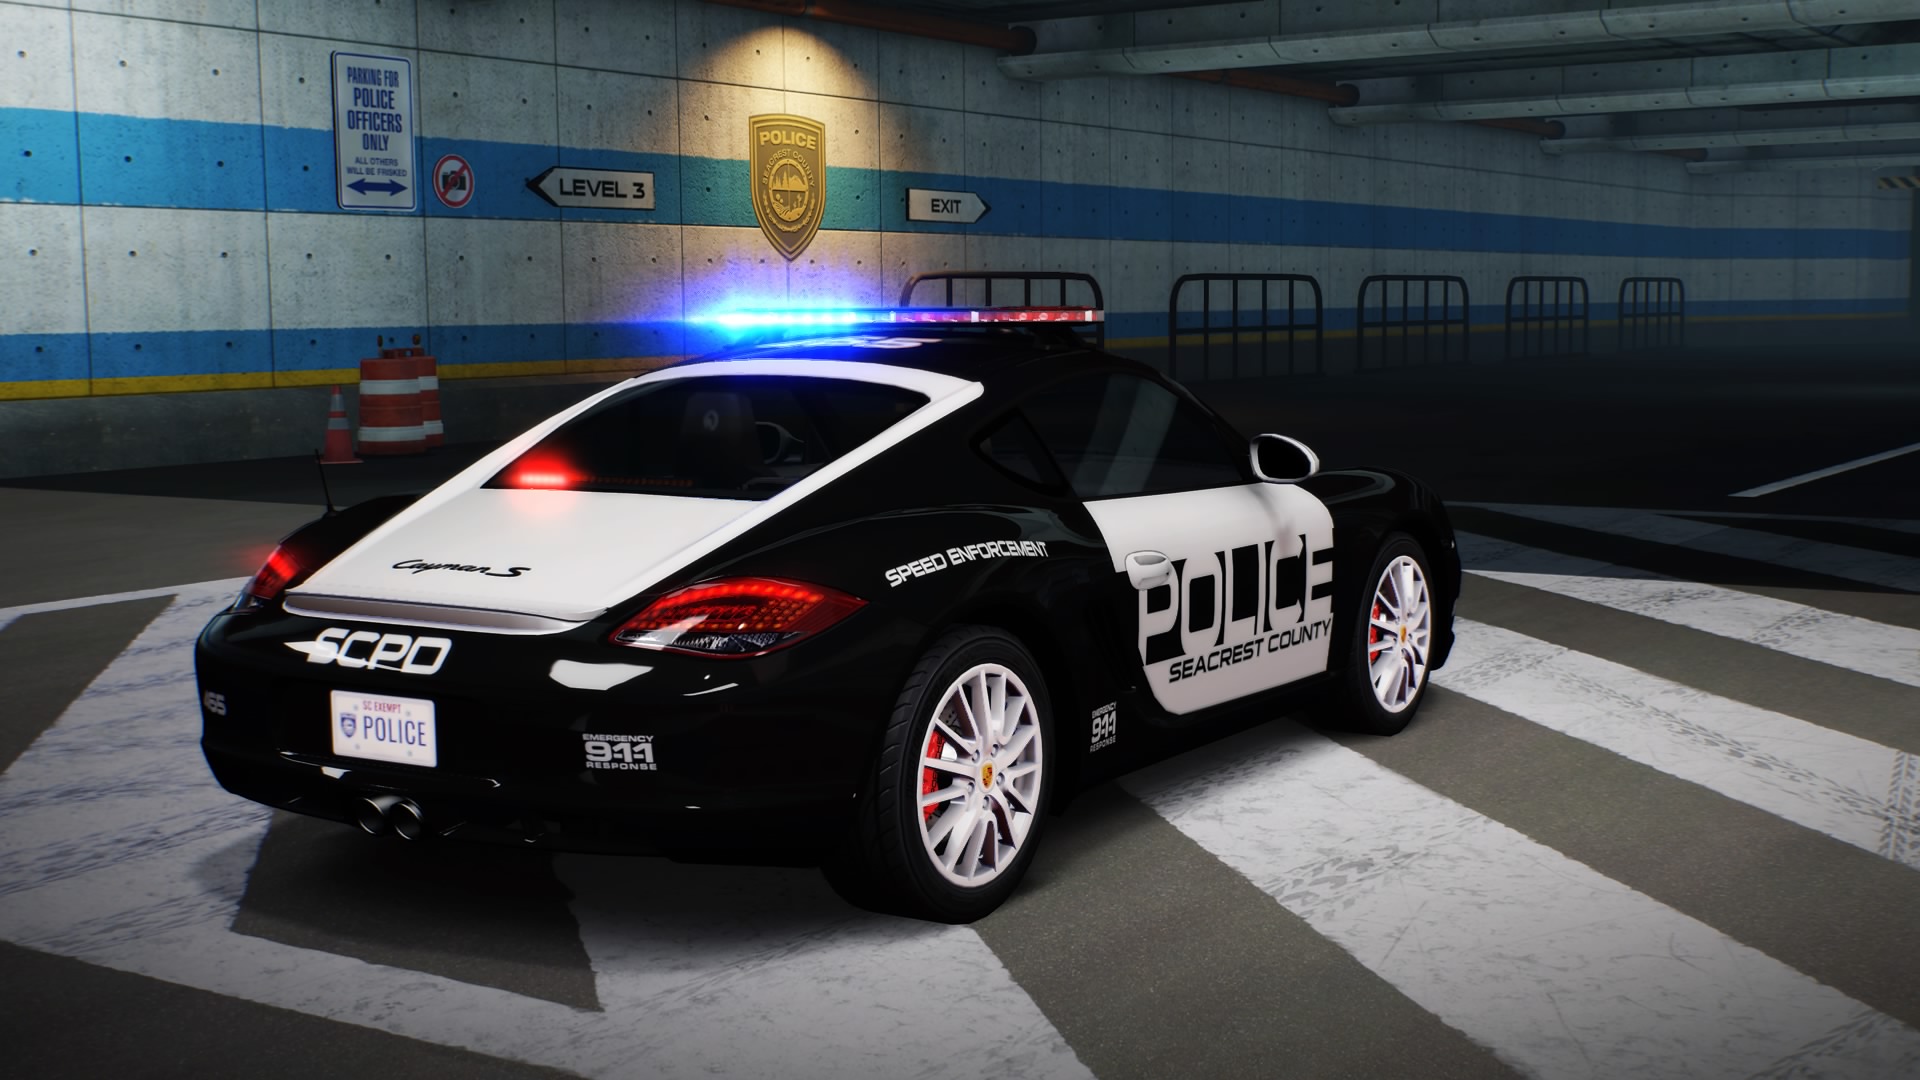 General 1920x1080 Need for Speed: Hot Pursuit car police cars Porsche Cayman PlayStation 4 screen shot